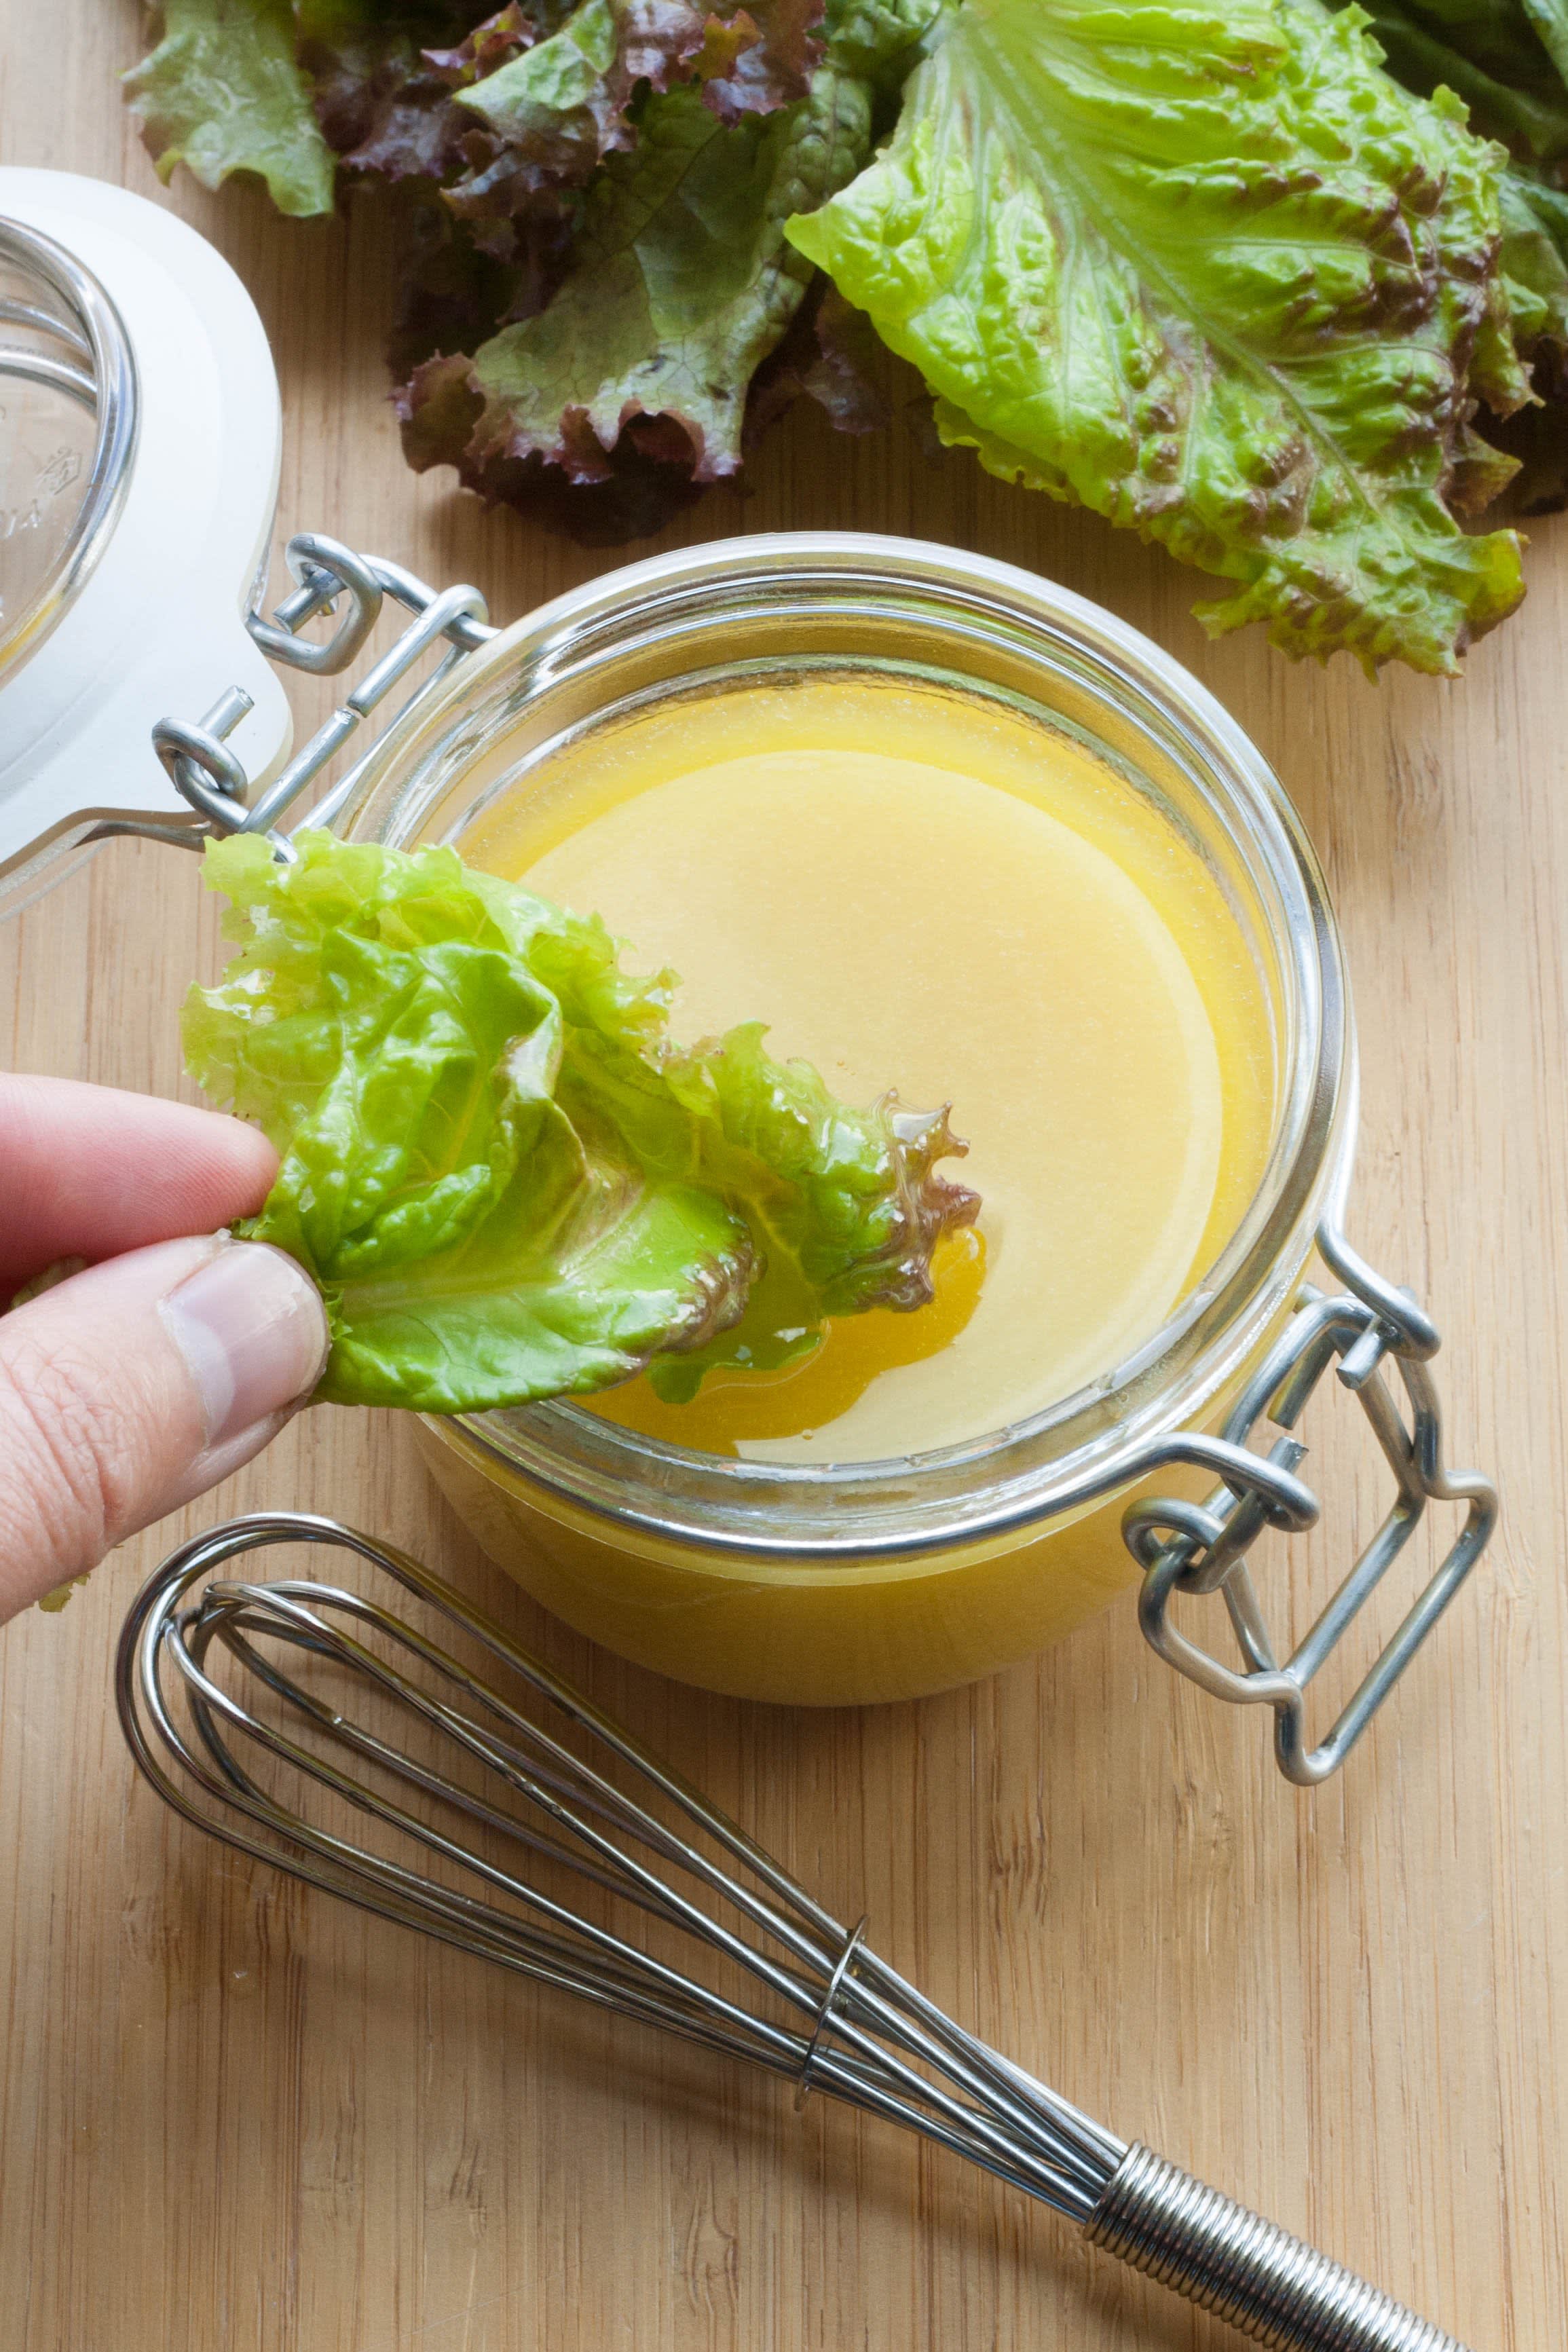 The Best Way to Taste Your Homemade Salad Dressing | Kitchn